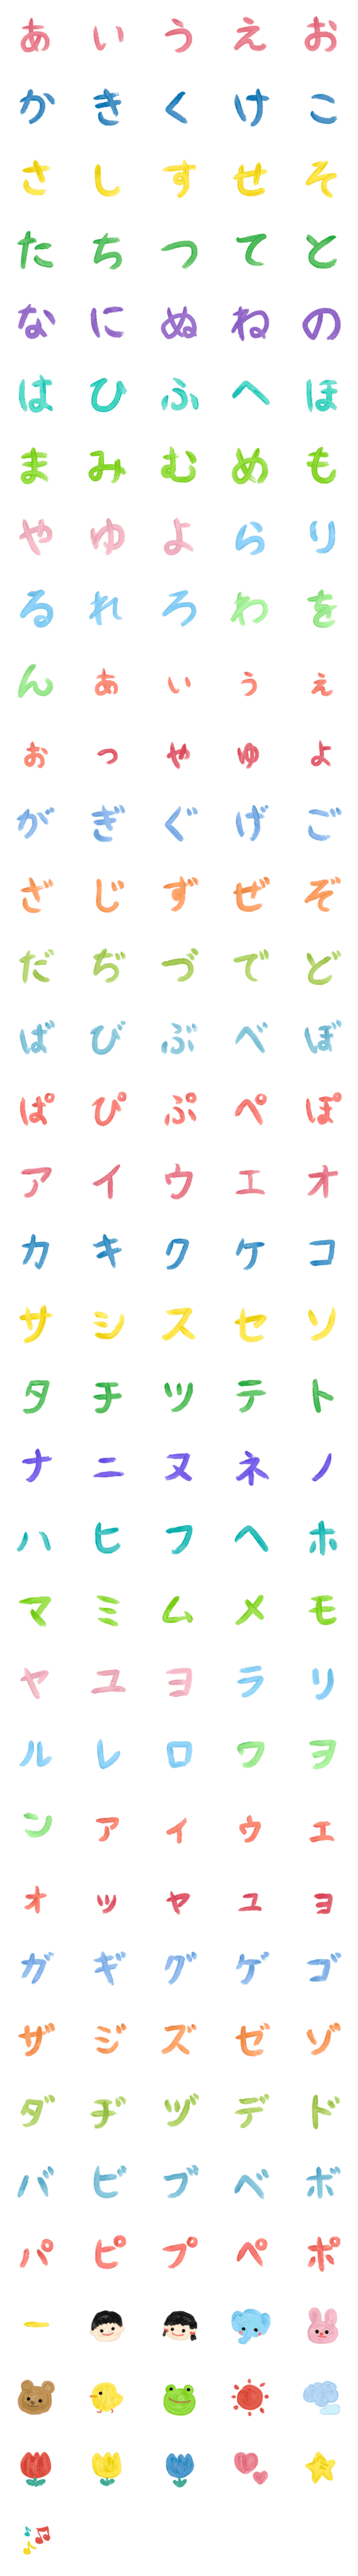 [LINE絵文字]絵の具で絵文字の画像一覧